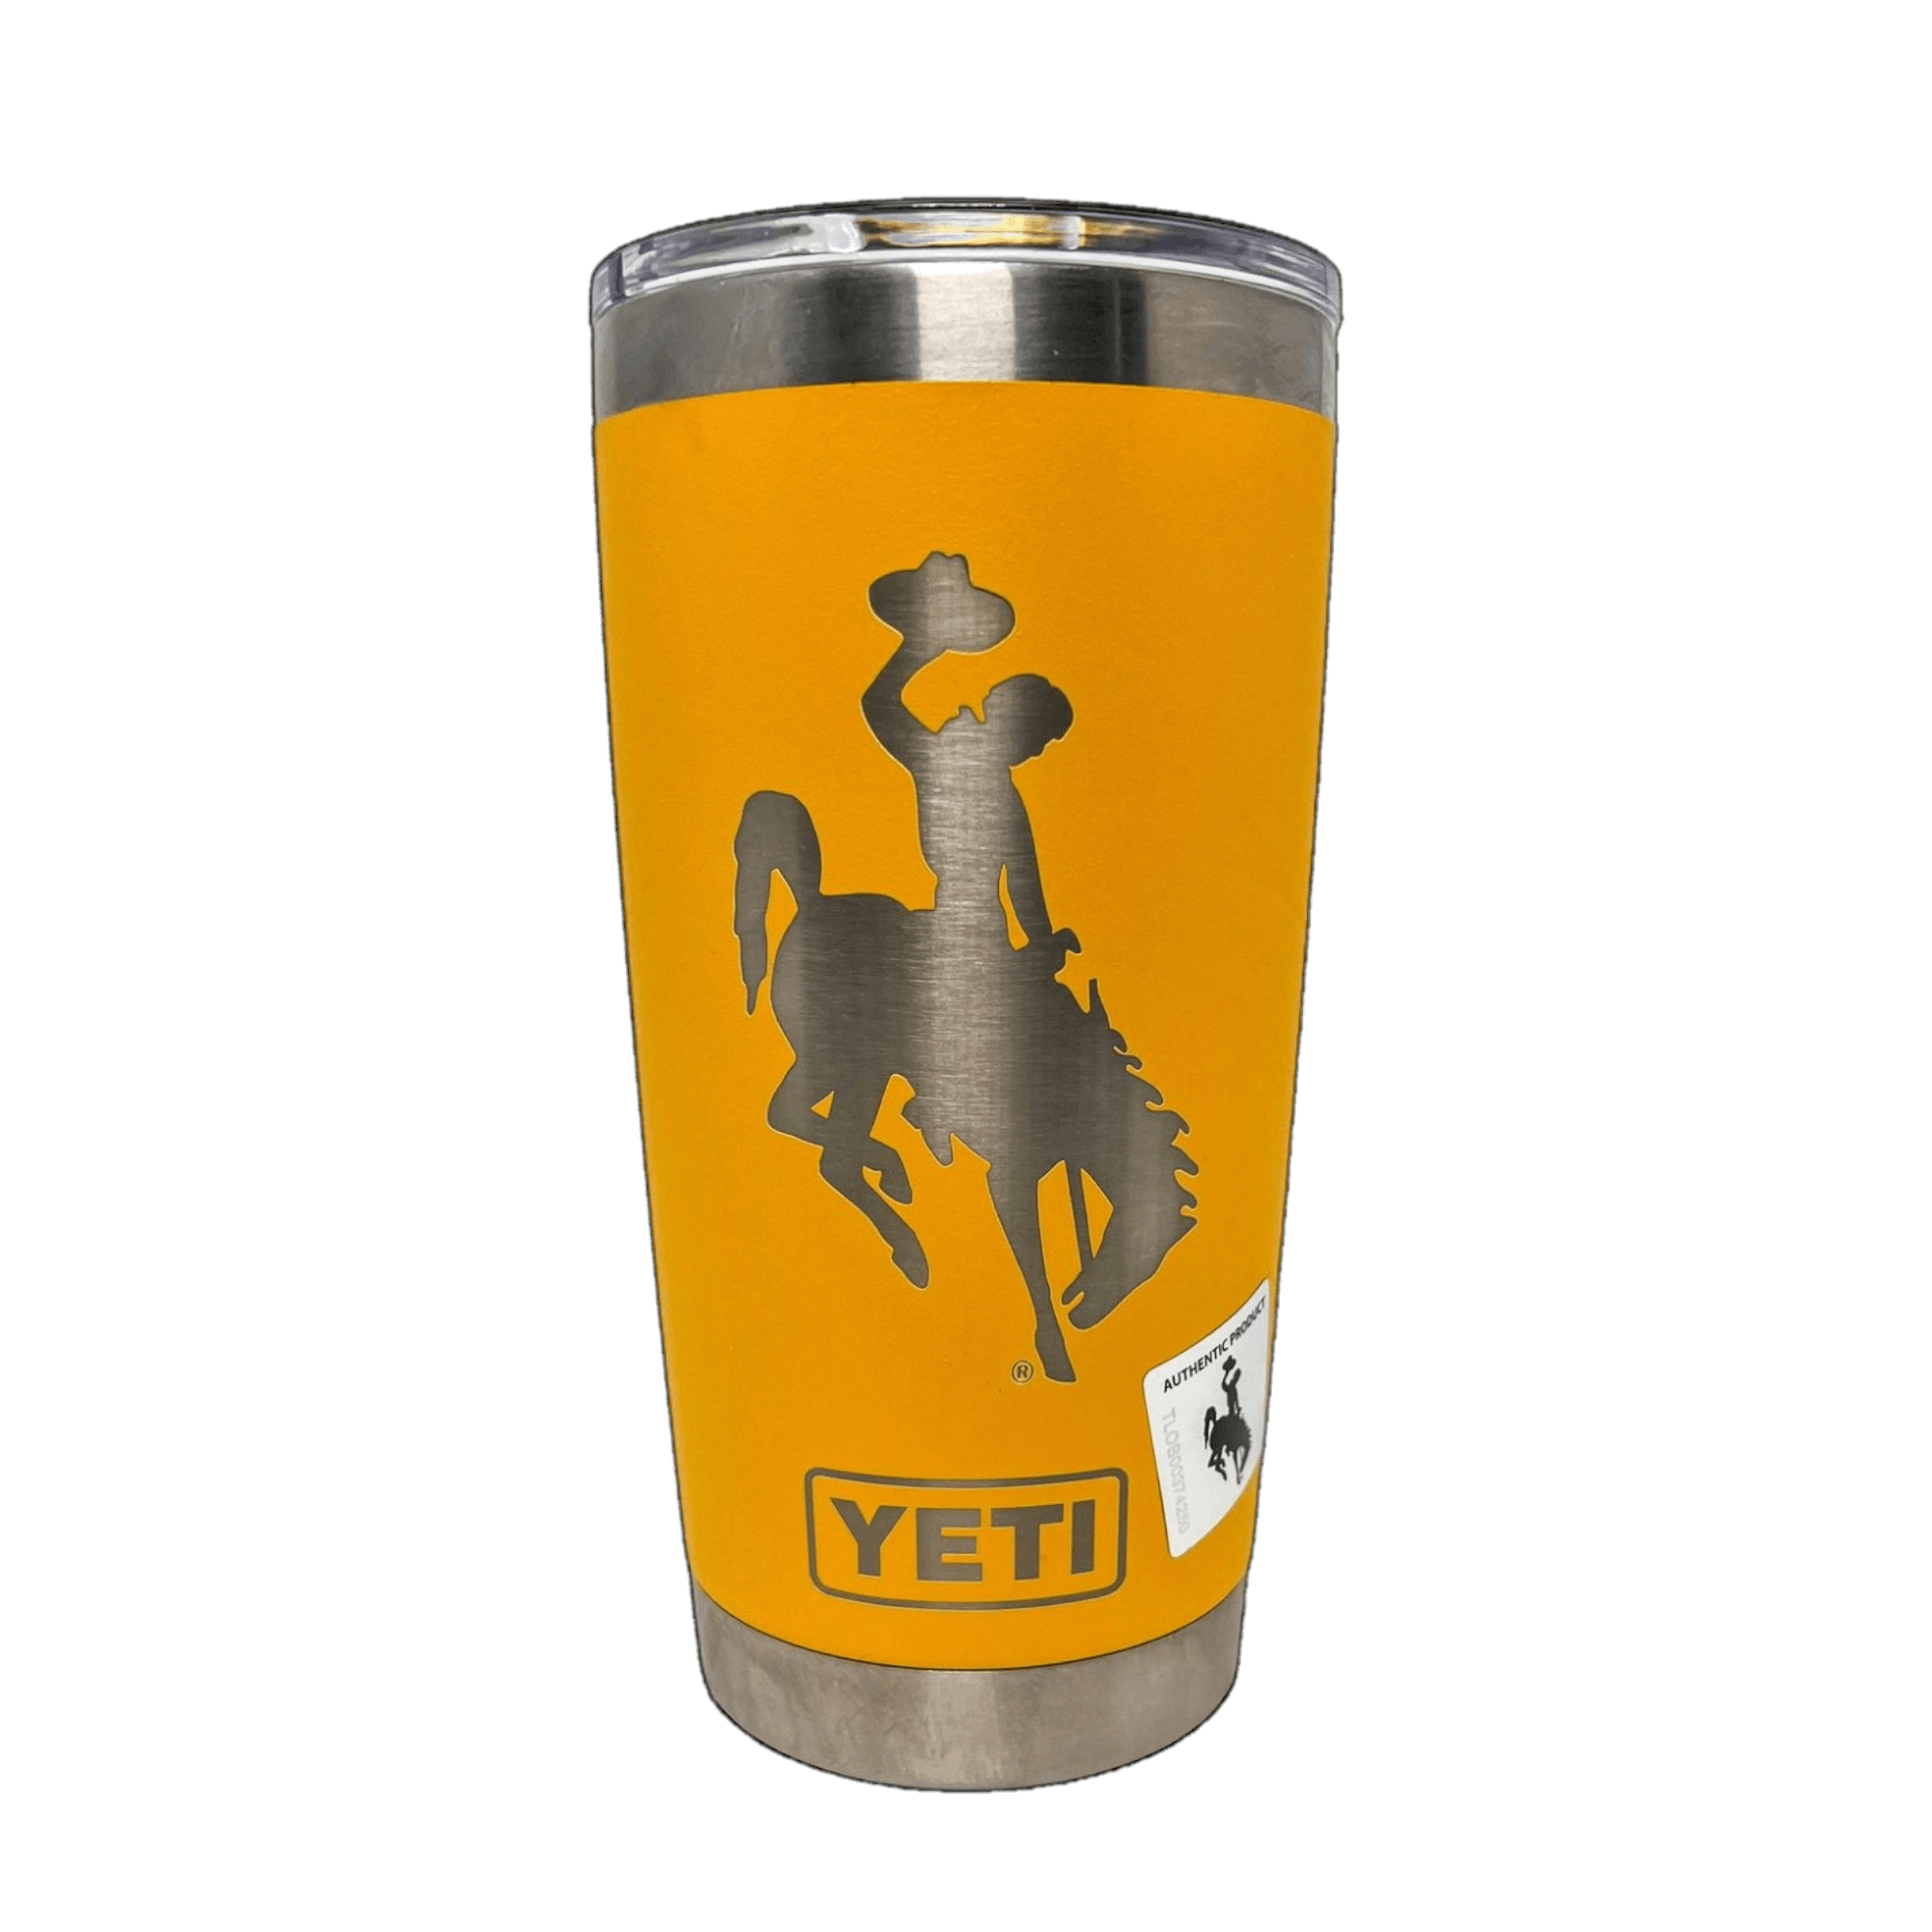 Yeti - Wind River Outpost